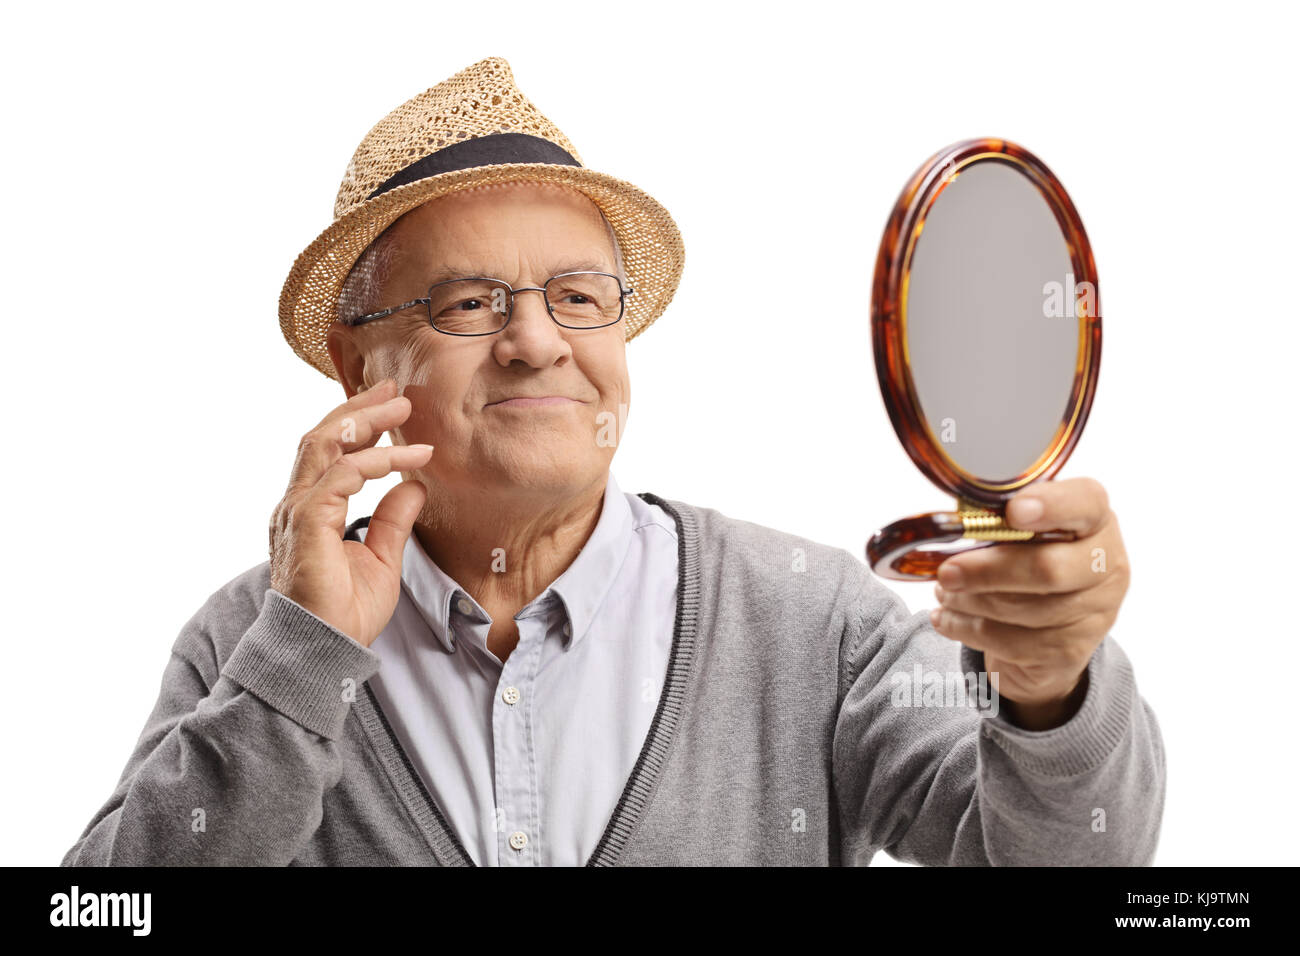 Elderly man looking at himself in a mirror and touching his face isolated on white background Stock Photo